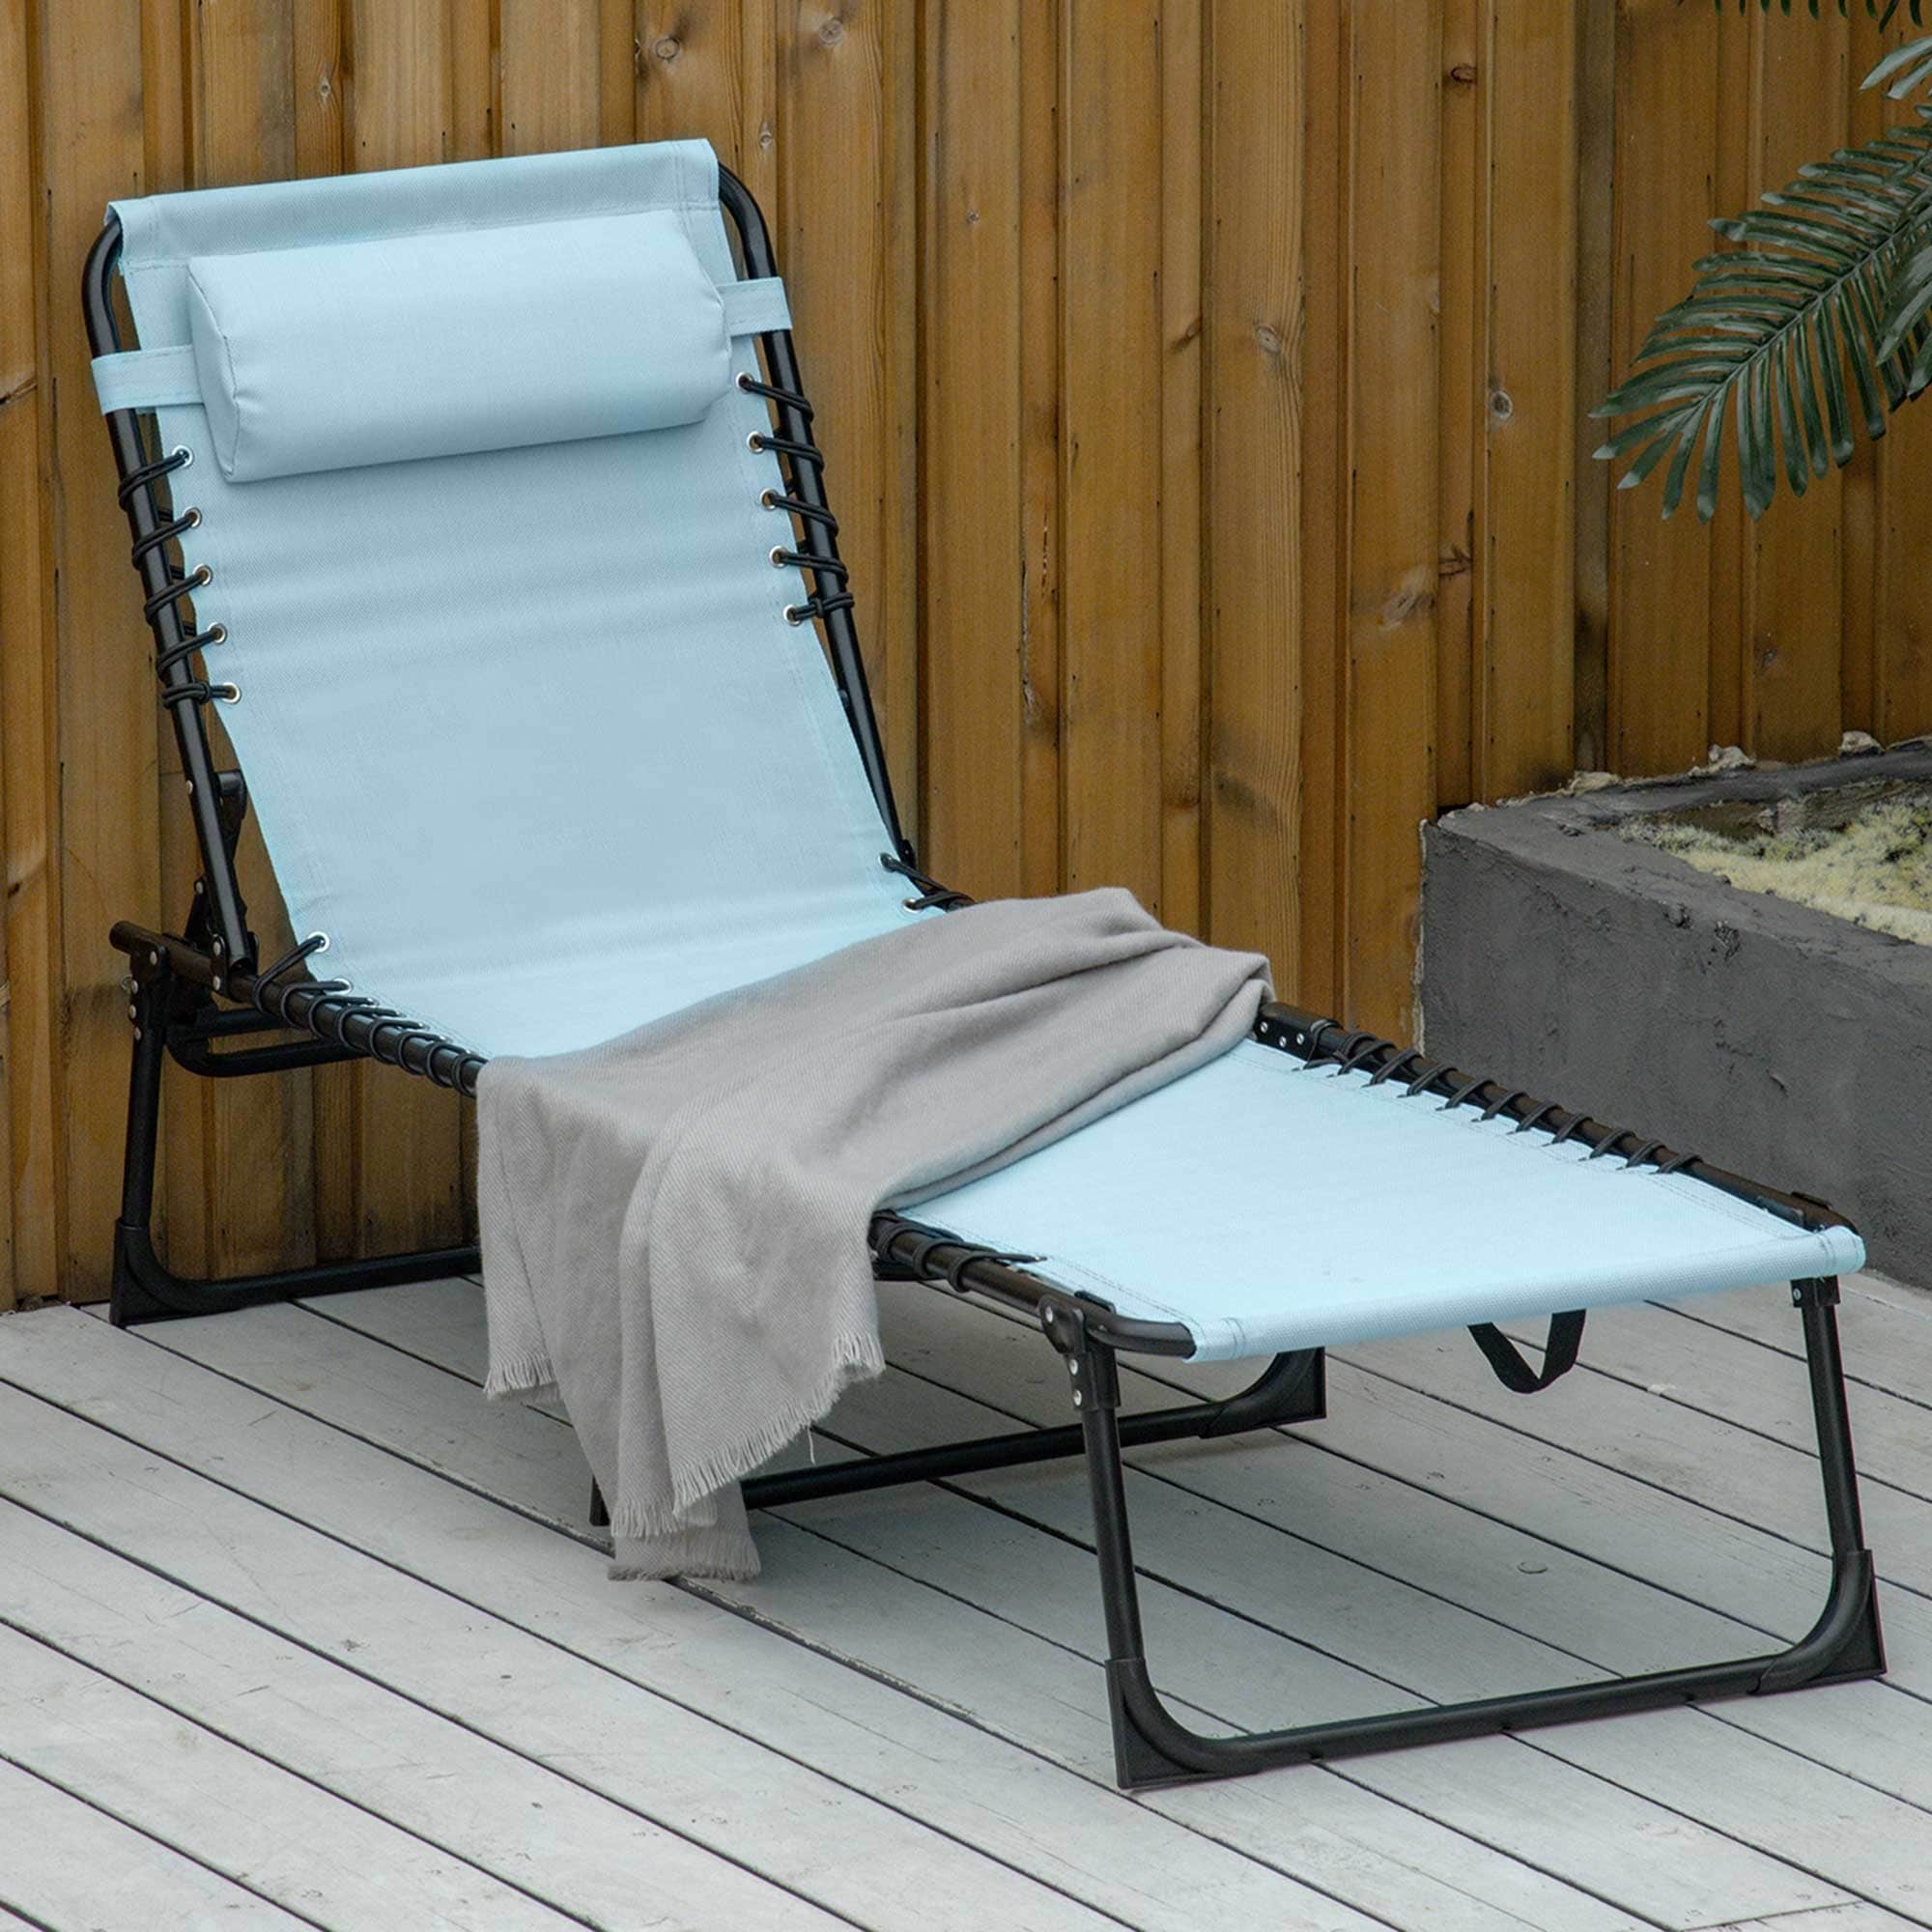 https://ak1.ostkcdn.com/images/products/is/images/direct/3a59c19151fab3754fed580994f0b9816c44598e/Outsunny-Folding-Chaise-Lounge-Chair-Portable-Lightweight-Reclining-Garden-Sun-Lounger-with-4-Position-Adjustable-Backrest.jpg